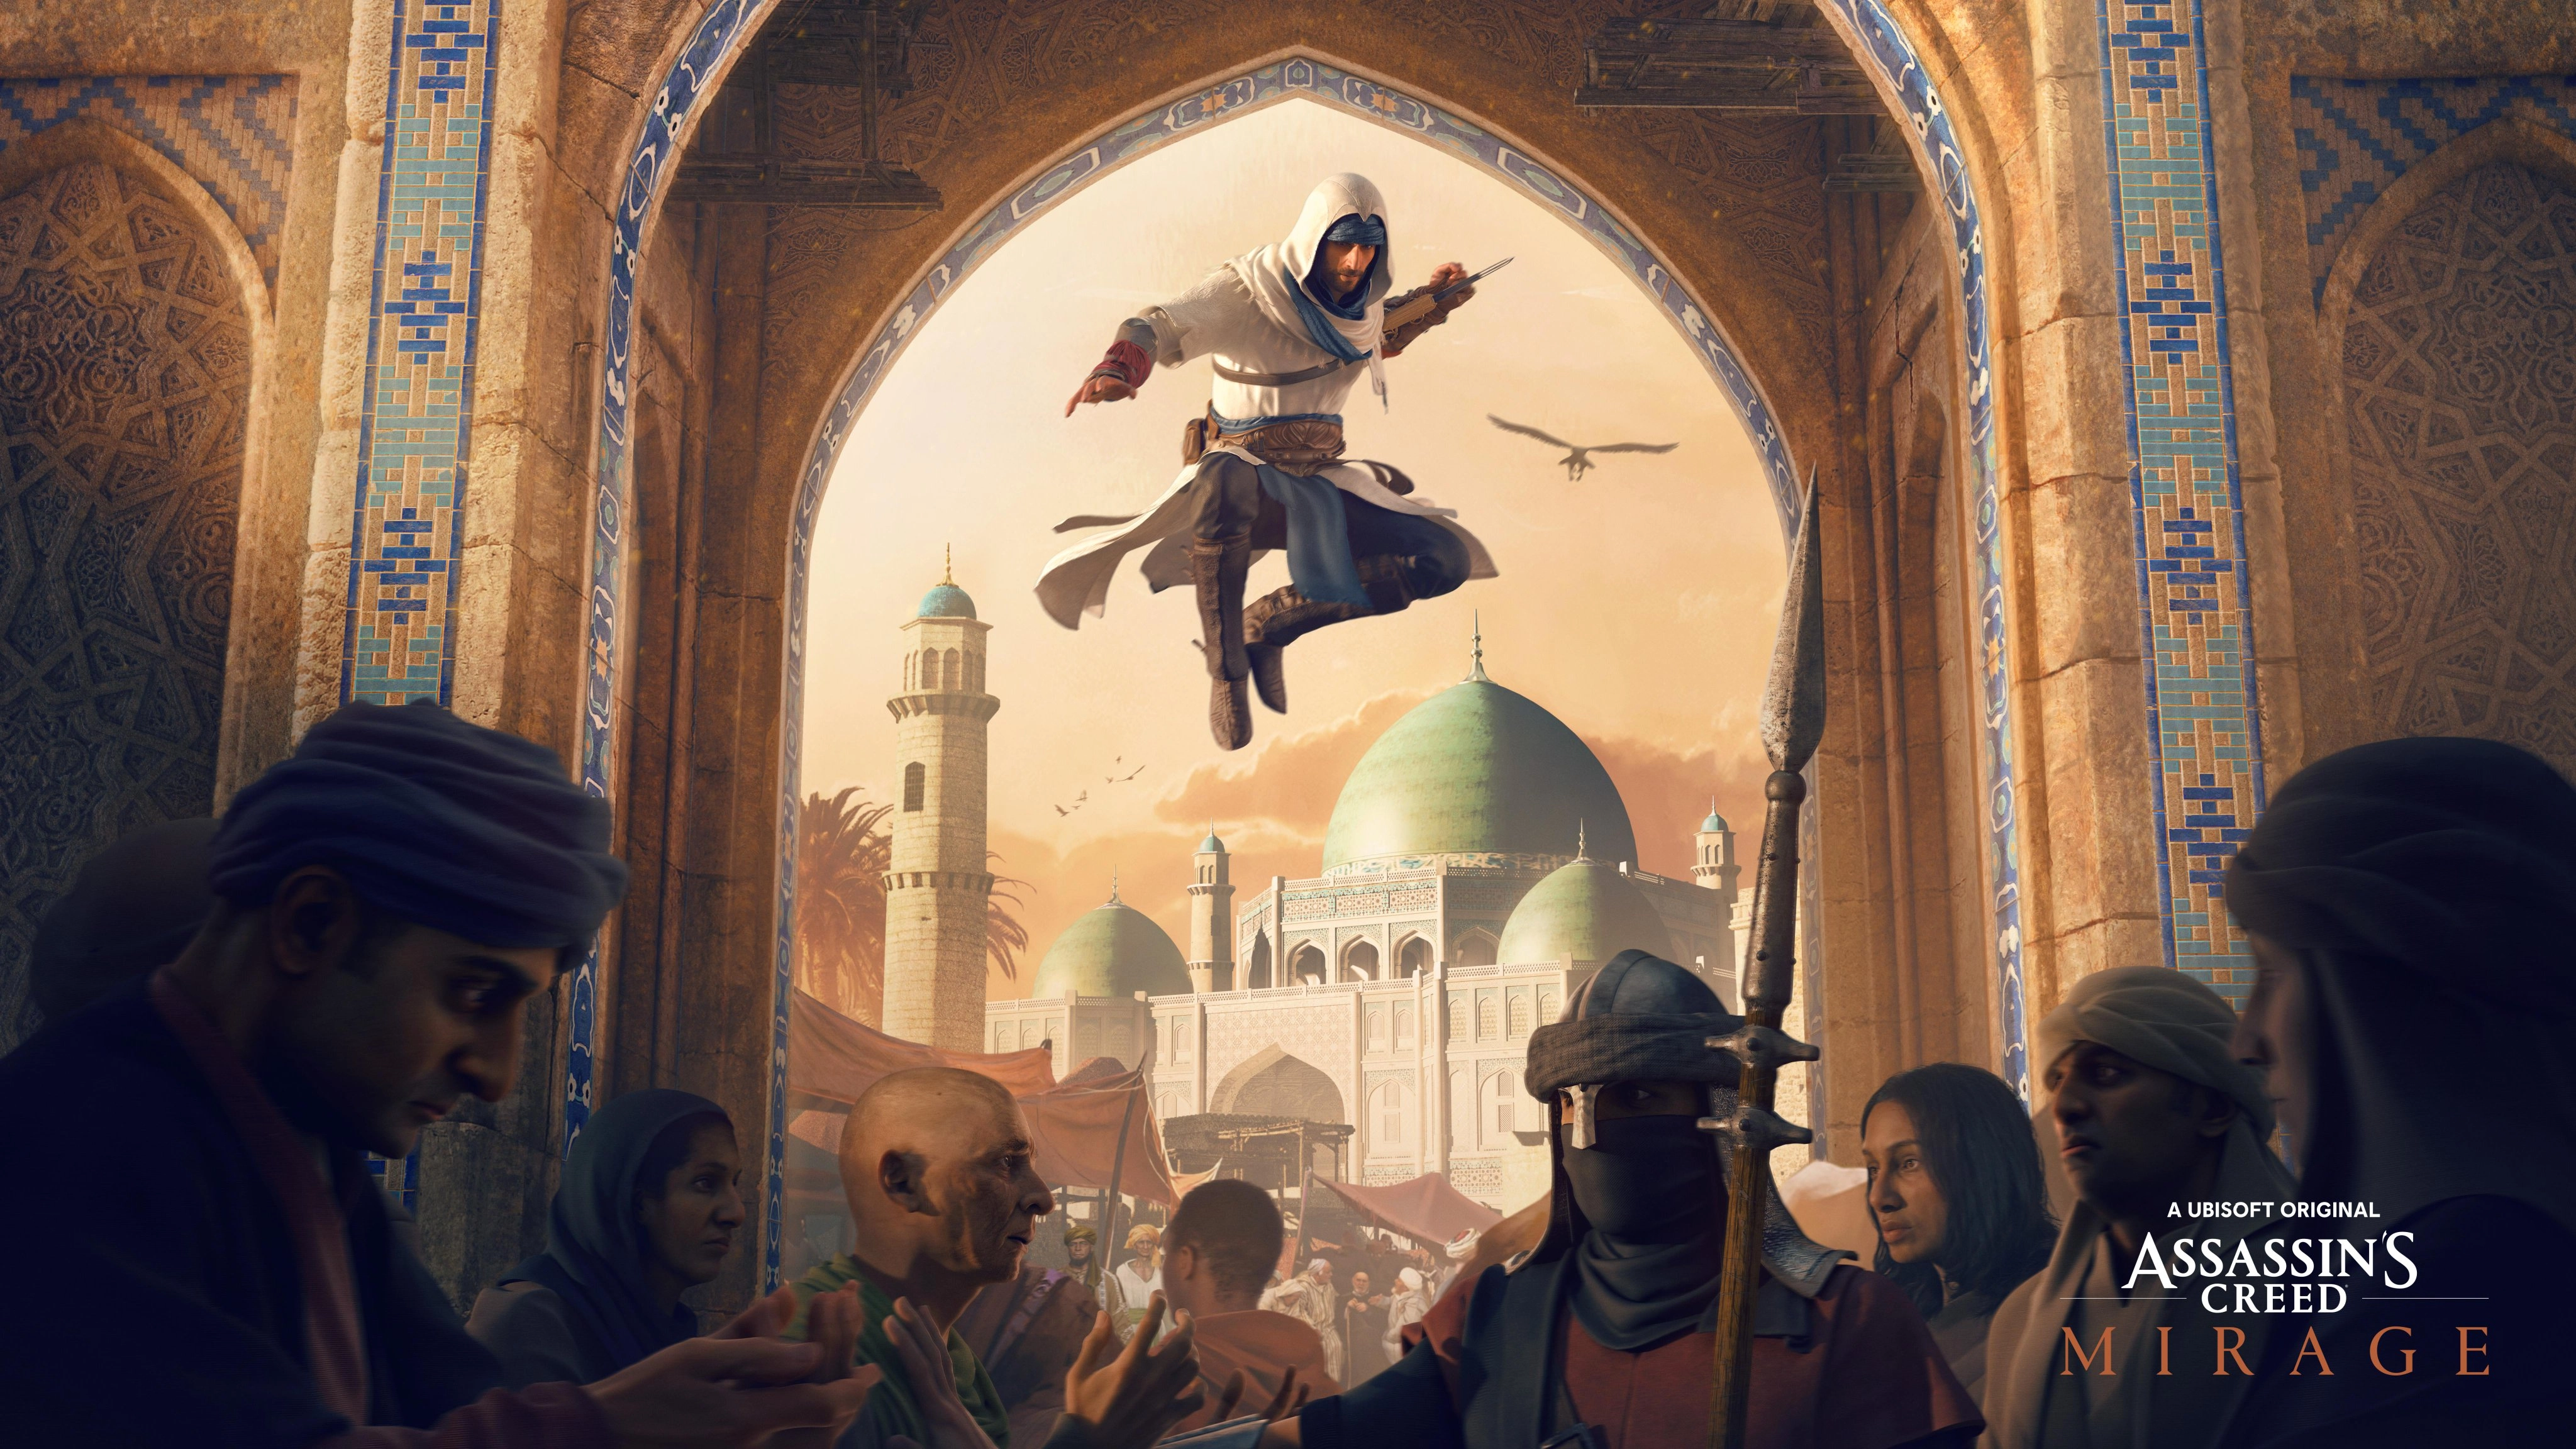 What to expect from the latest installment in the Assassin's Creed franchise